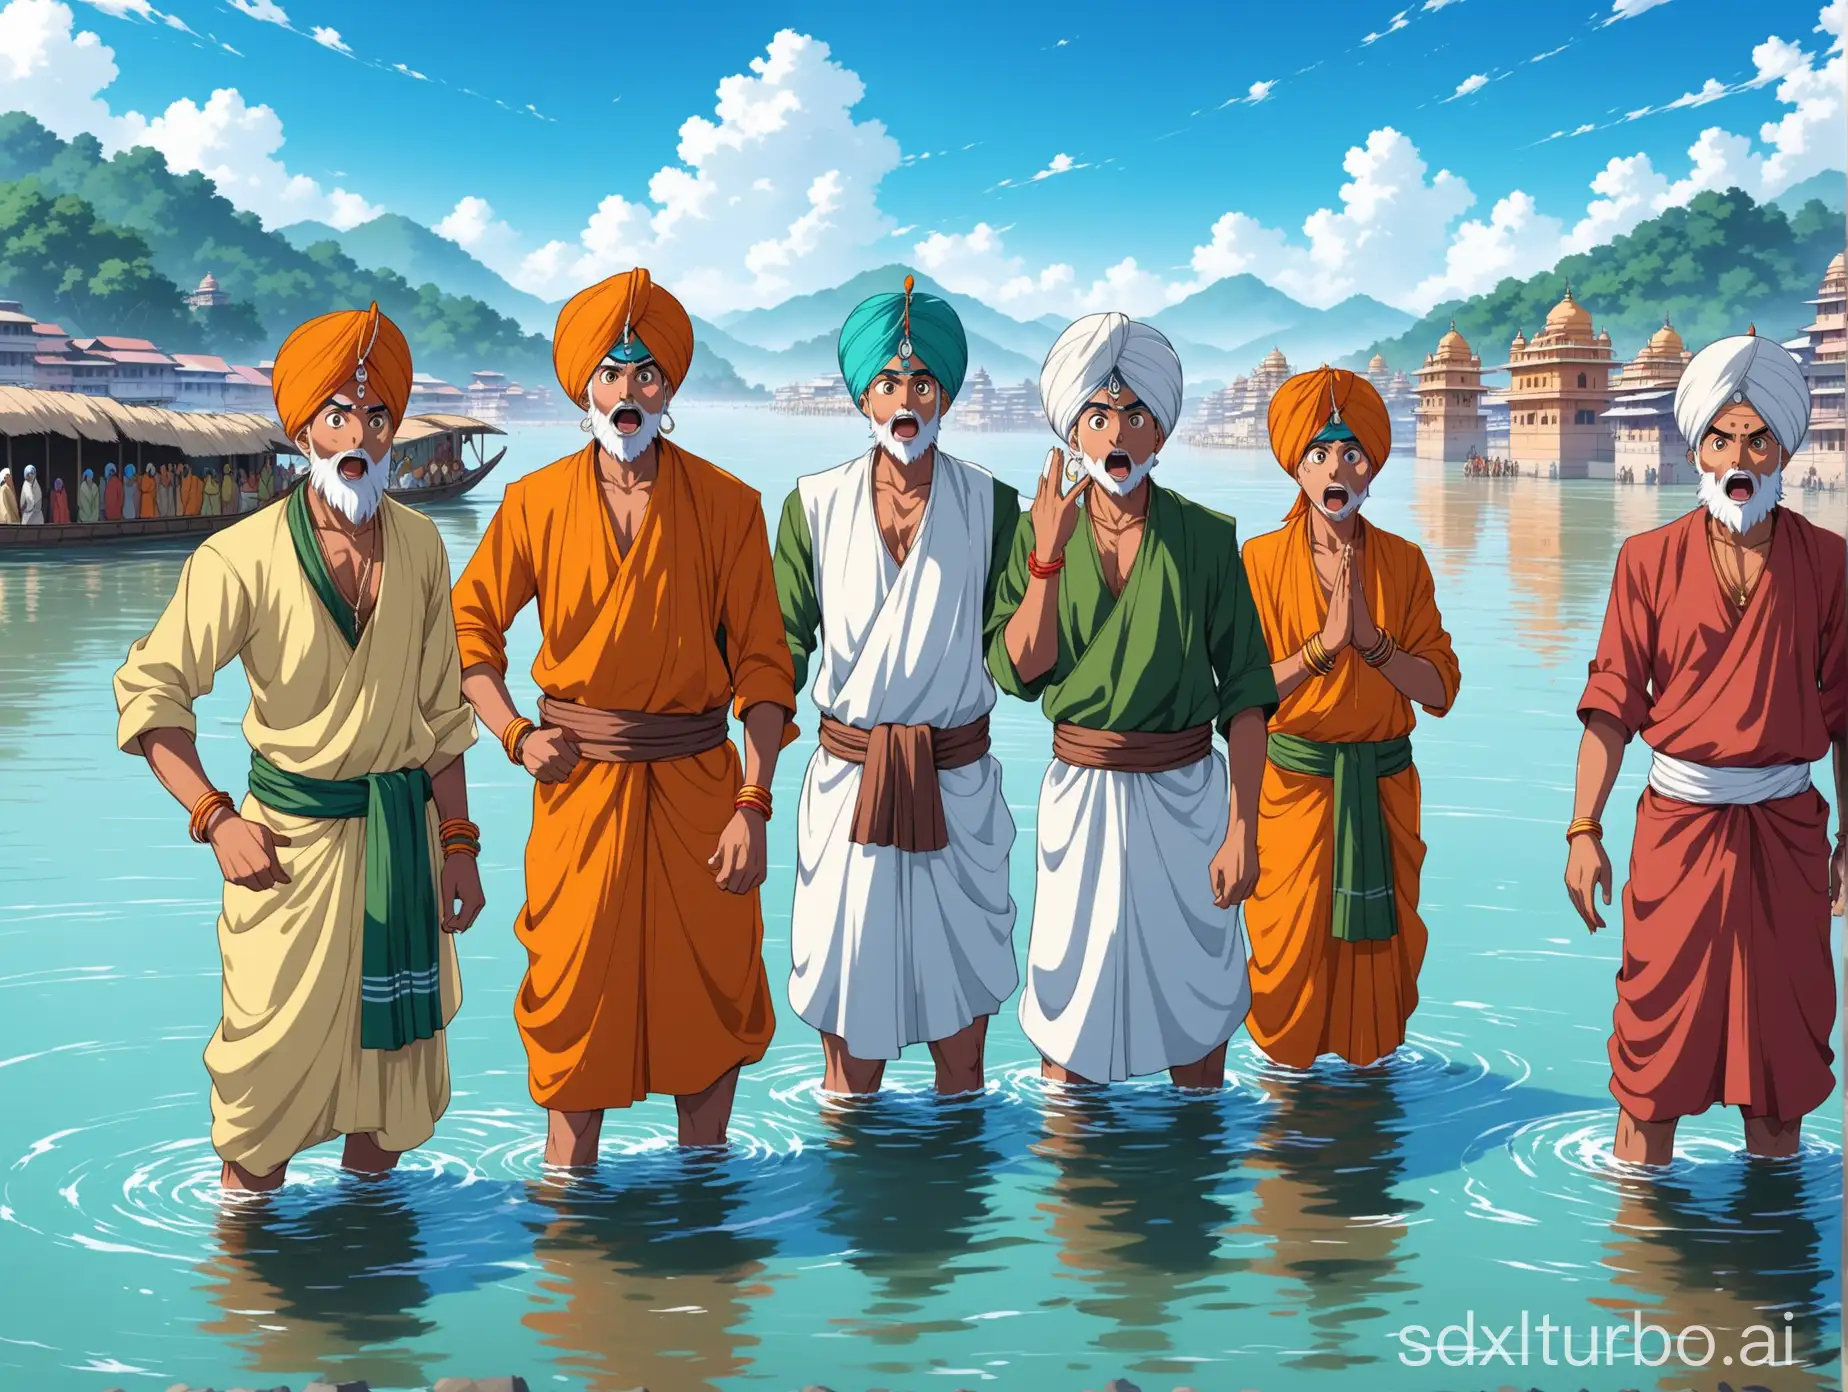 Surprised-Indian-Group-Standing-on-Ganges-River-in-Anime-Style